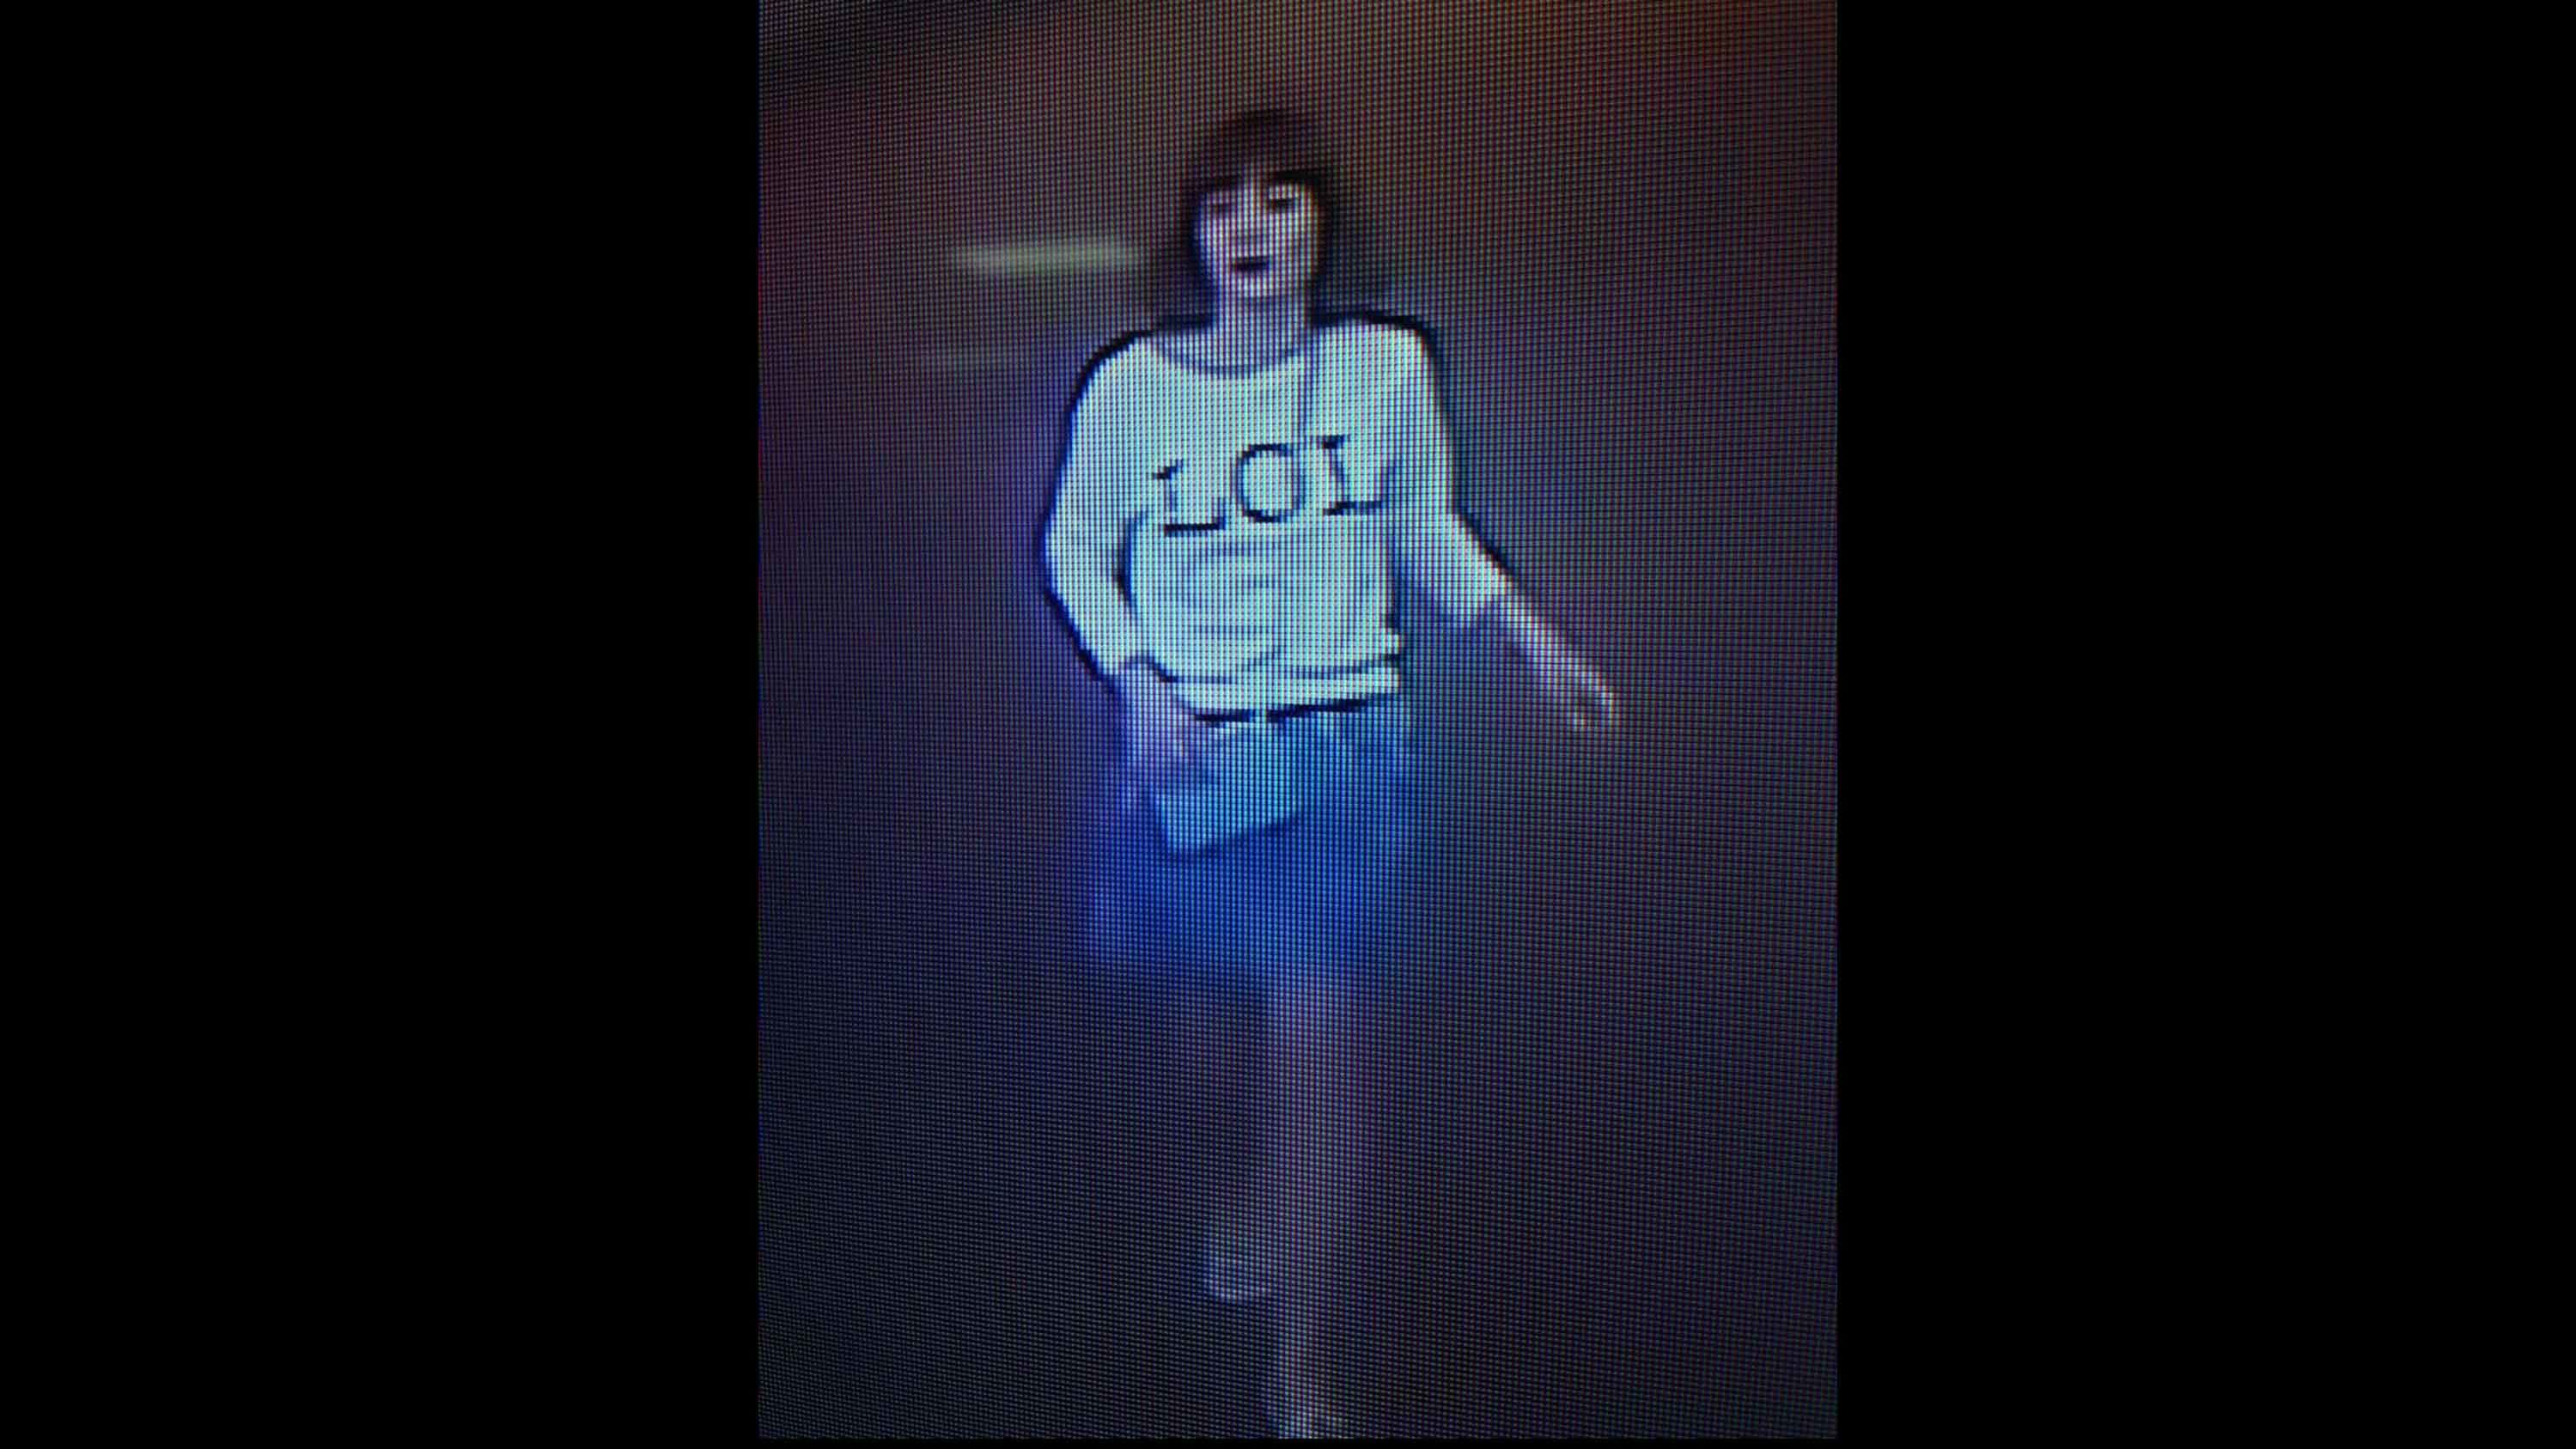 Surveillance footage shows woman with "LOL" shirt 